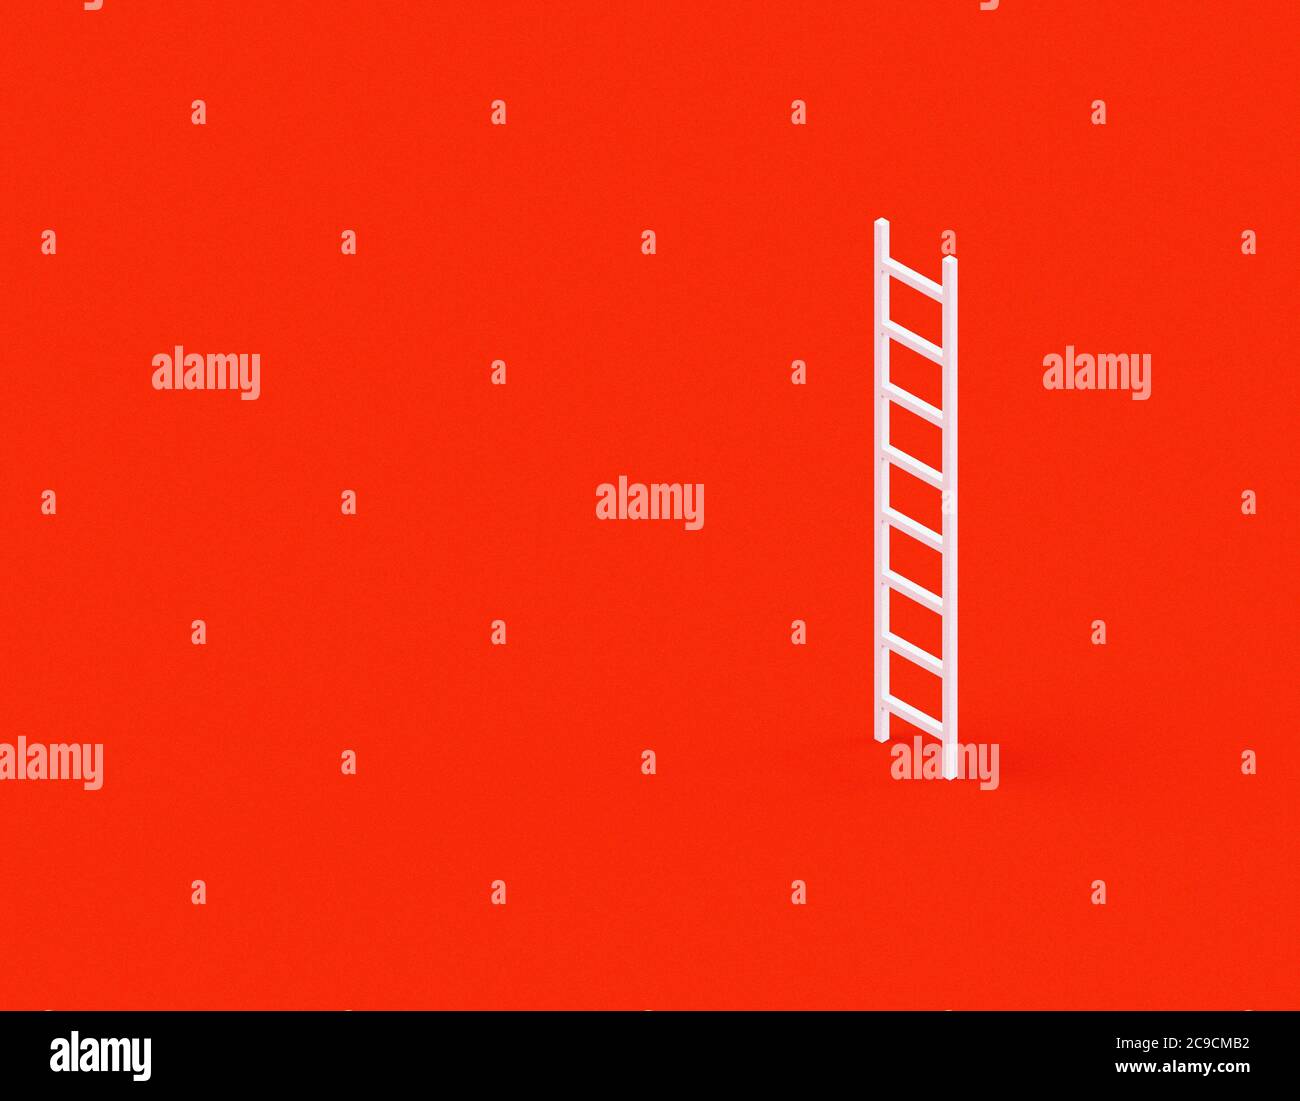 White ladder on an infinite red background minimalist isometric 3D rendered concept Stock Photo